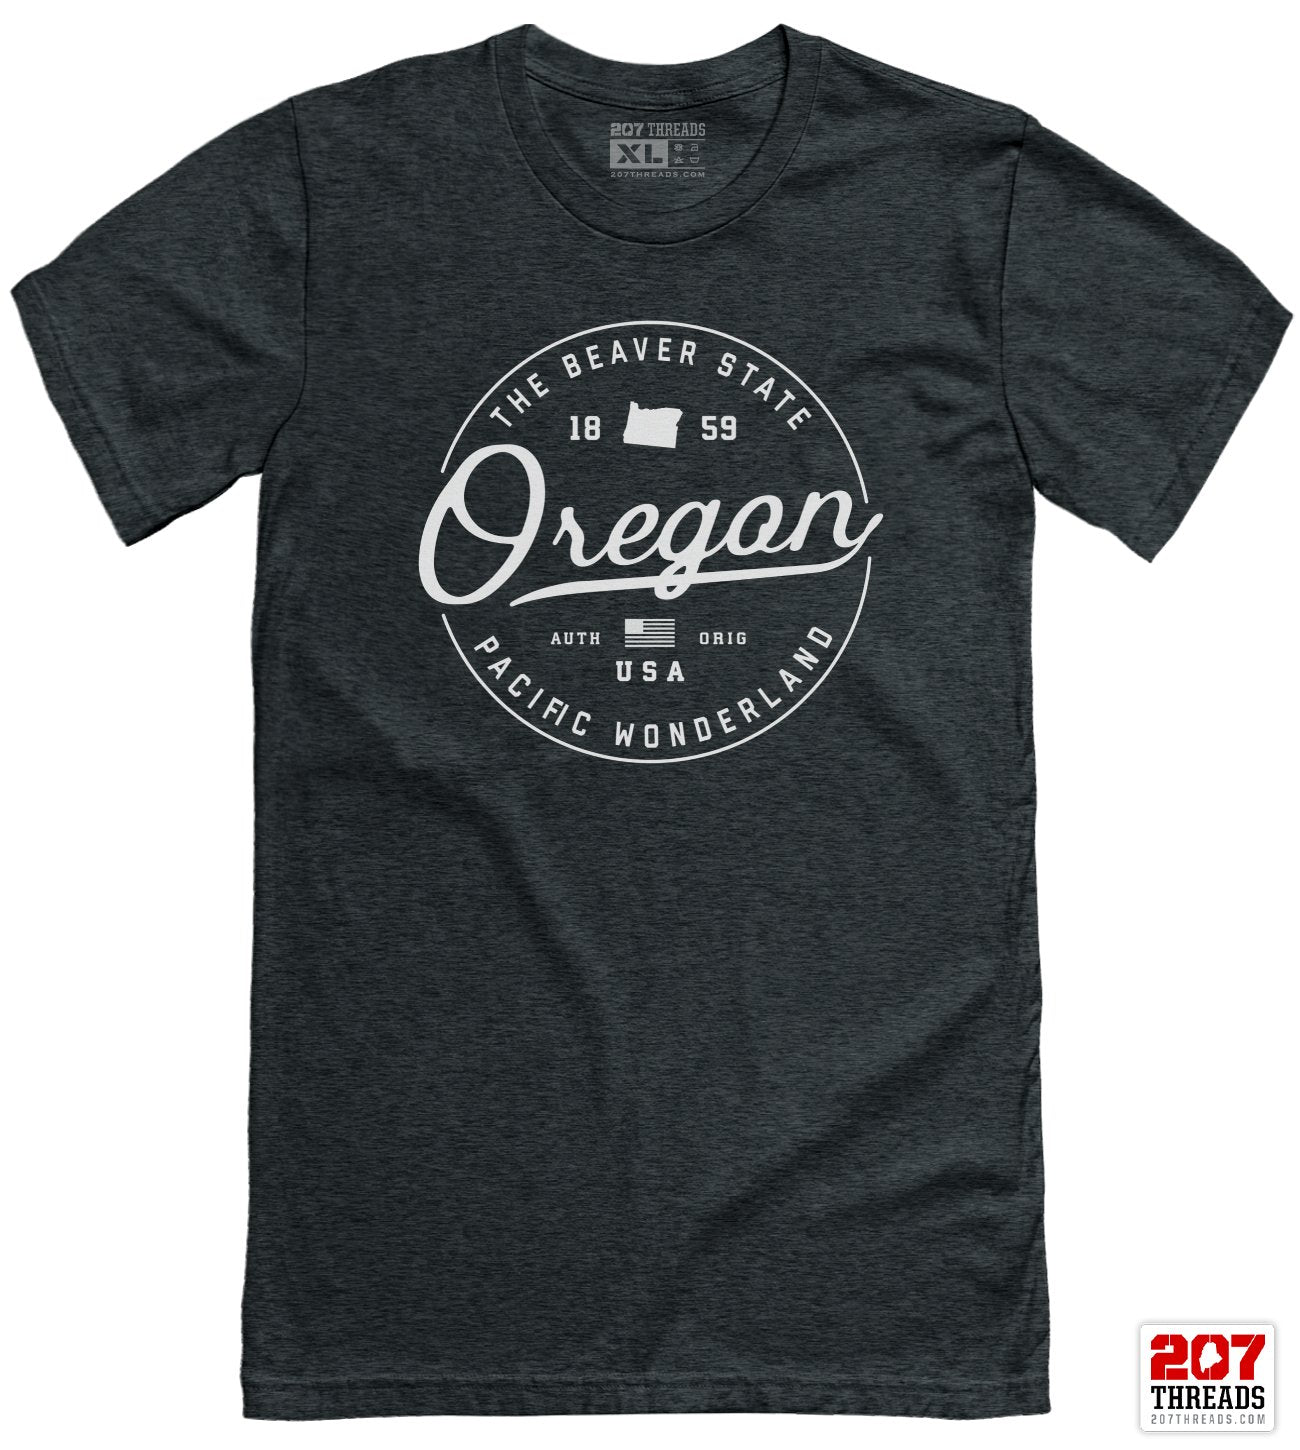 State of Oregon T-Shirt - Soft Oregon Vacation Tee